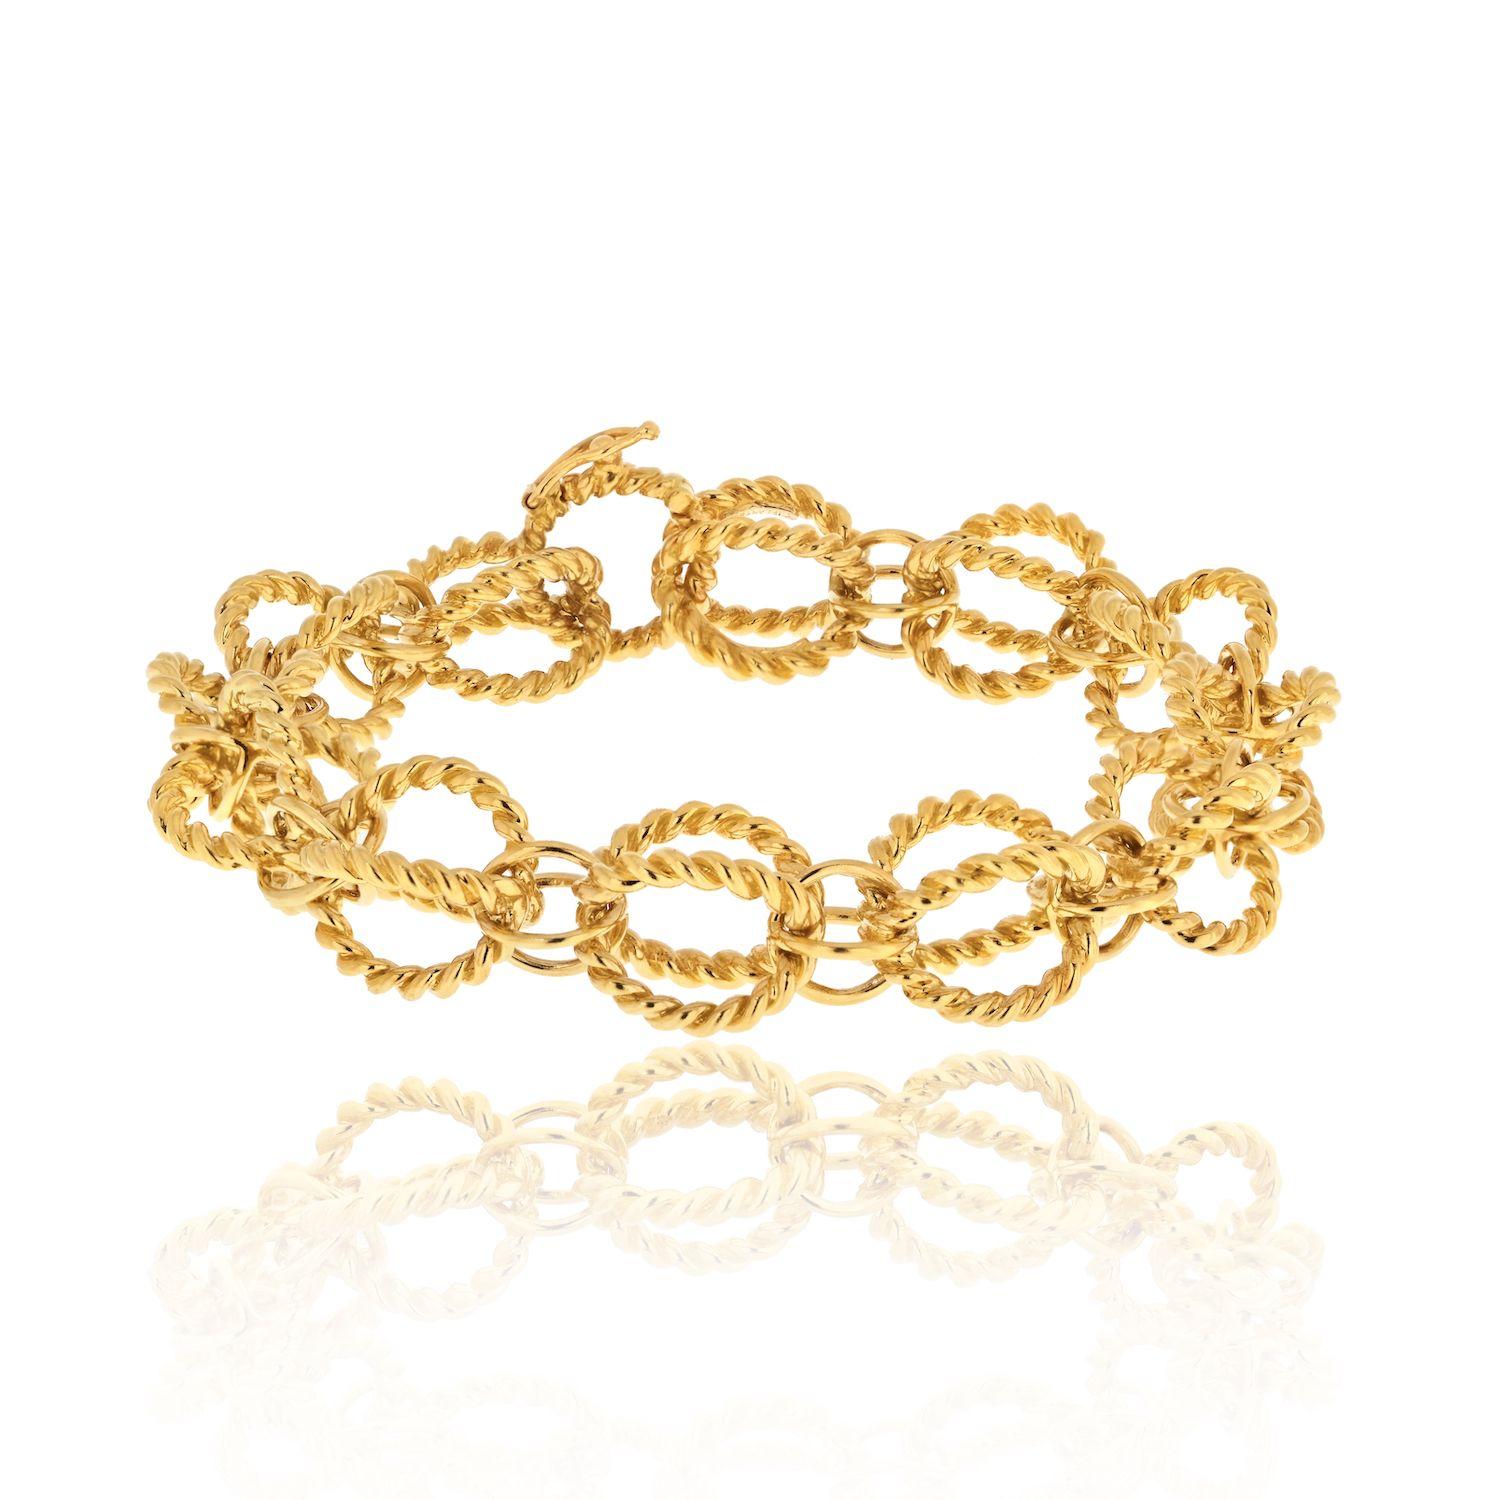 Tiffany & Co. 18K Yellow Gold Schlumberger Circle Rope Bracelet.
Jean Schlumberger’s visionary creations are among the world’s most intricate designs. Ornate twisted links add dimension to this elegant bracelet.

L: 7 inches.